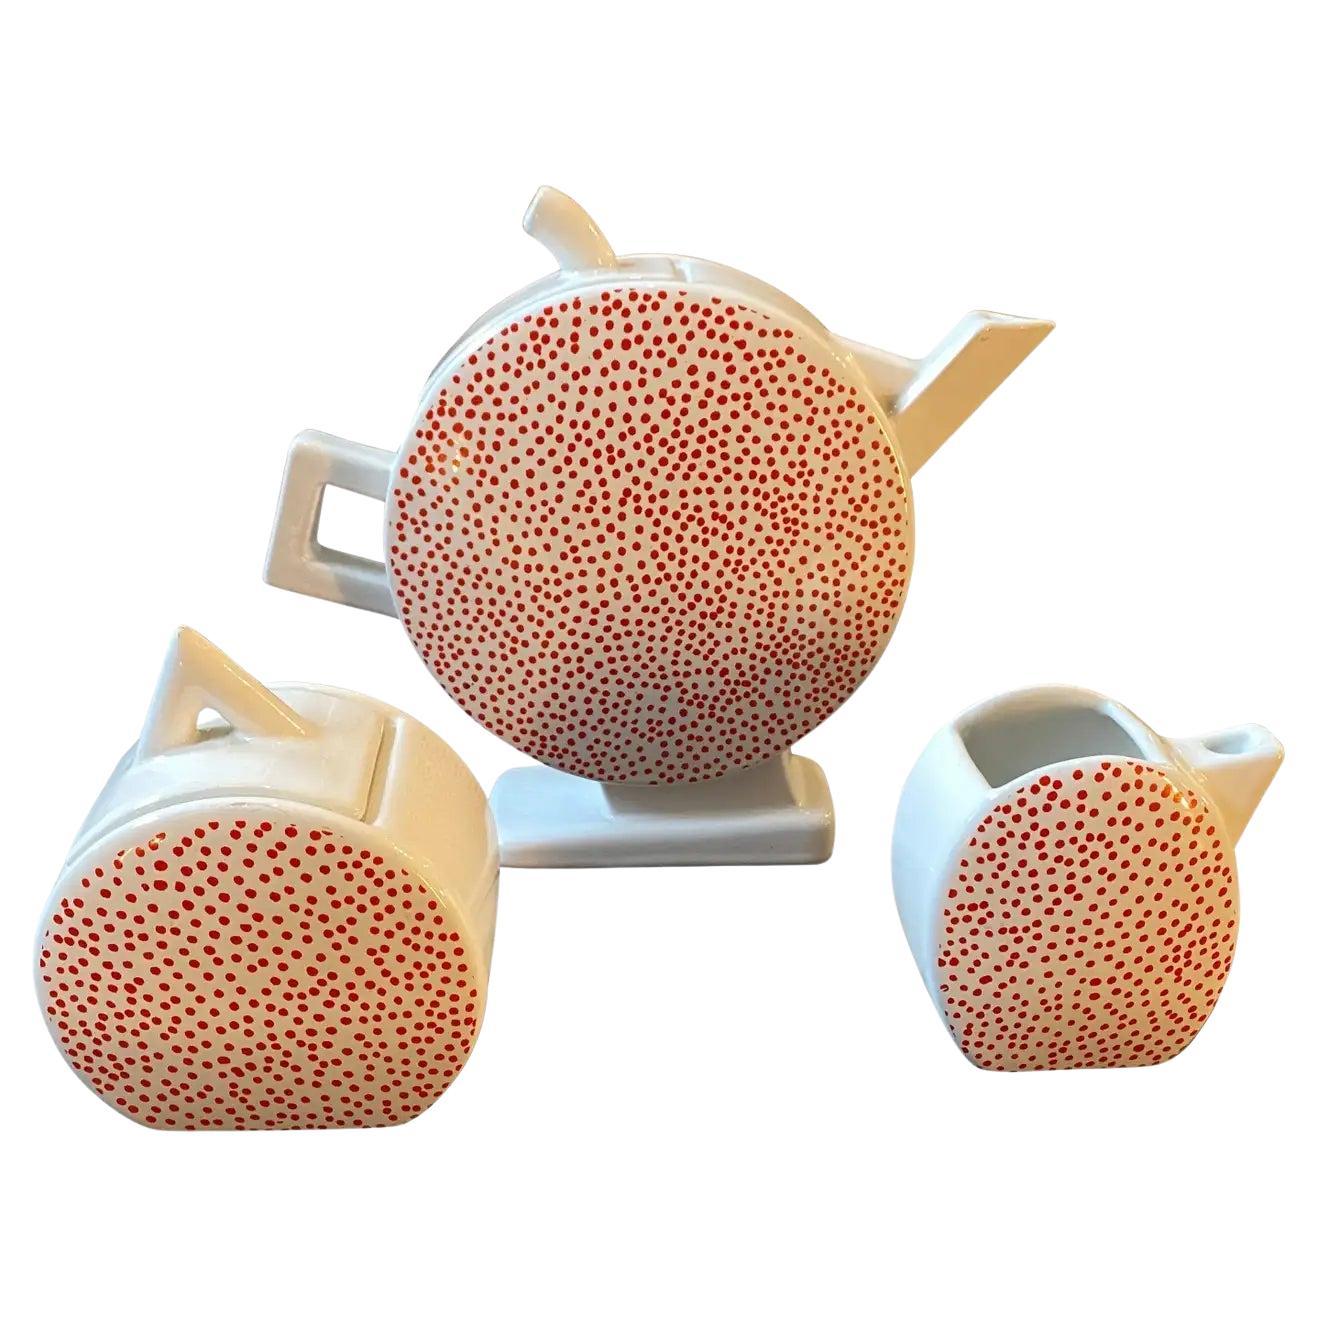 1980s Memphis Milano White and Red Ceramic Italian Tea Set by MAS For Sale